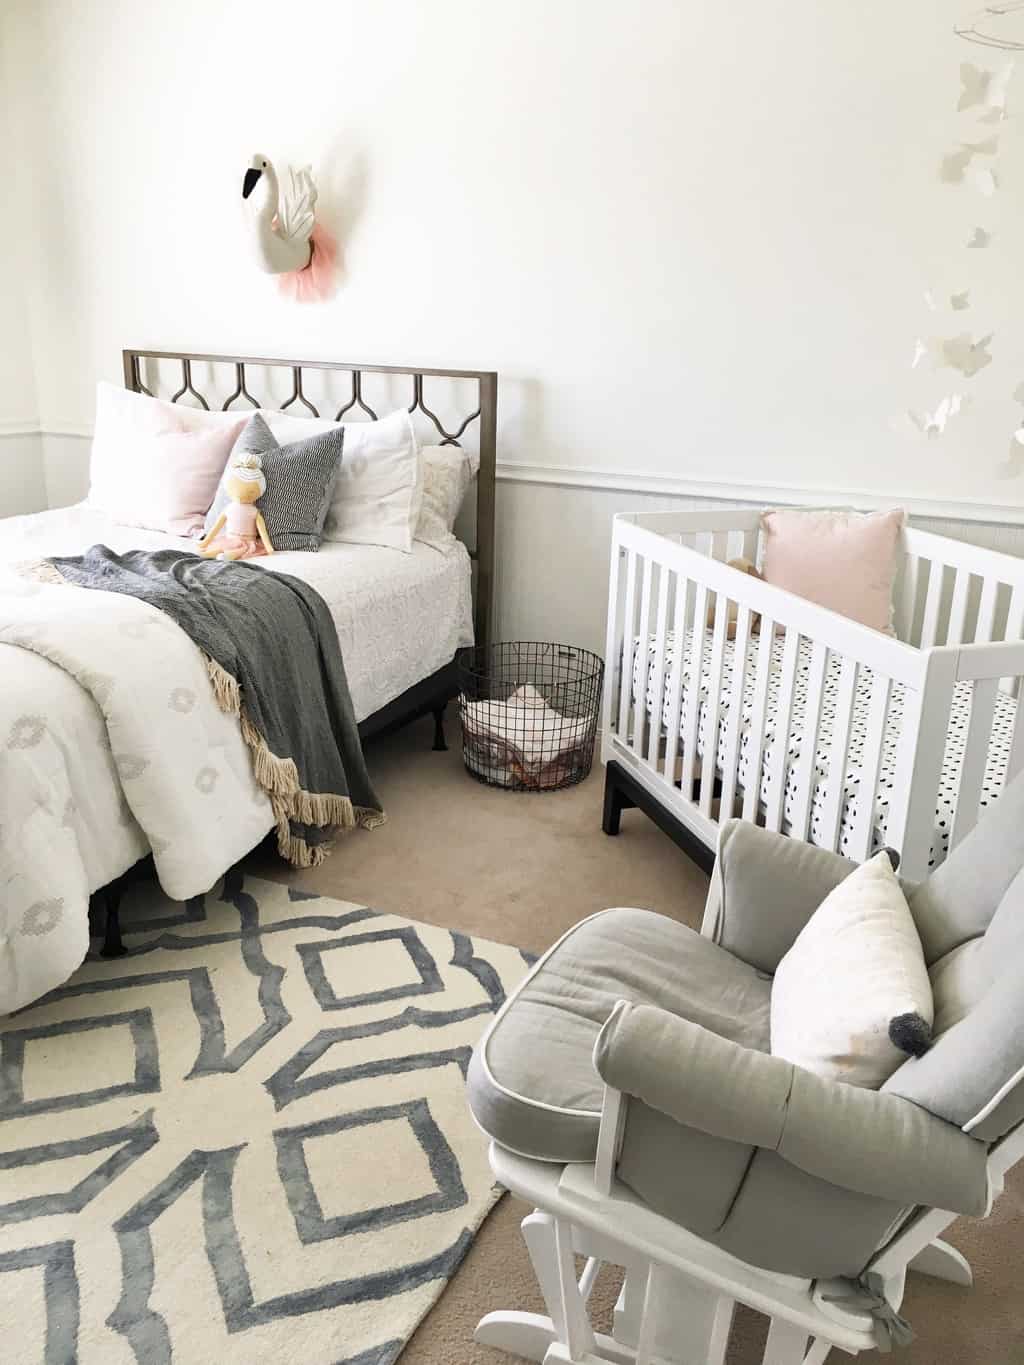 Cohesive-Styled Bedroom | Sharing Bedroom With Baby | Baby Journey